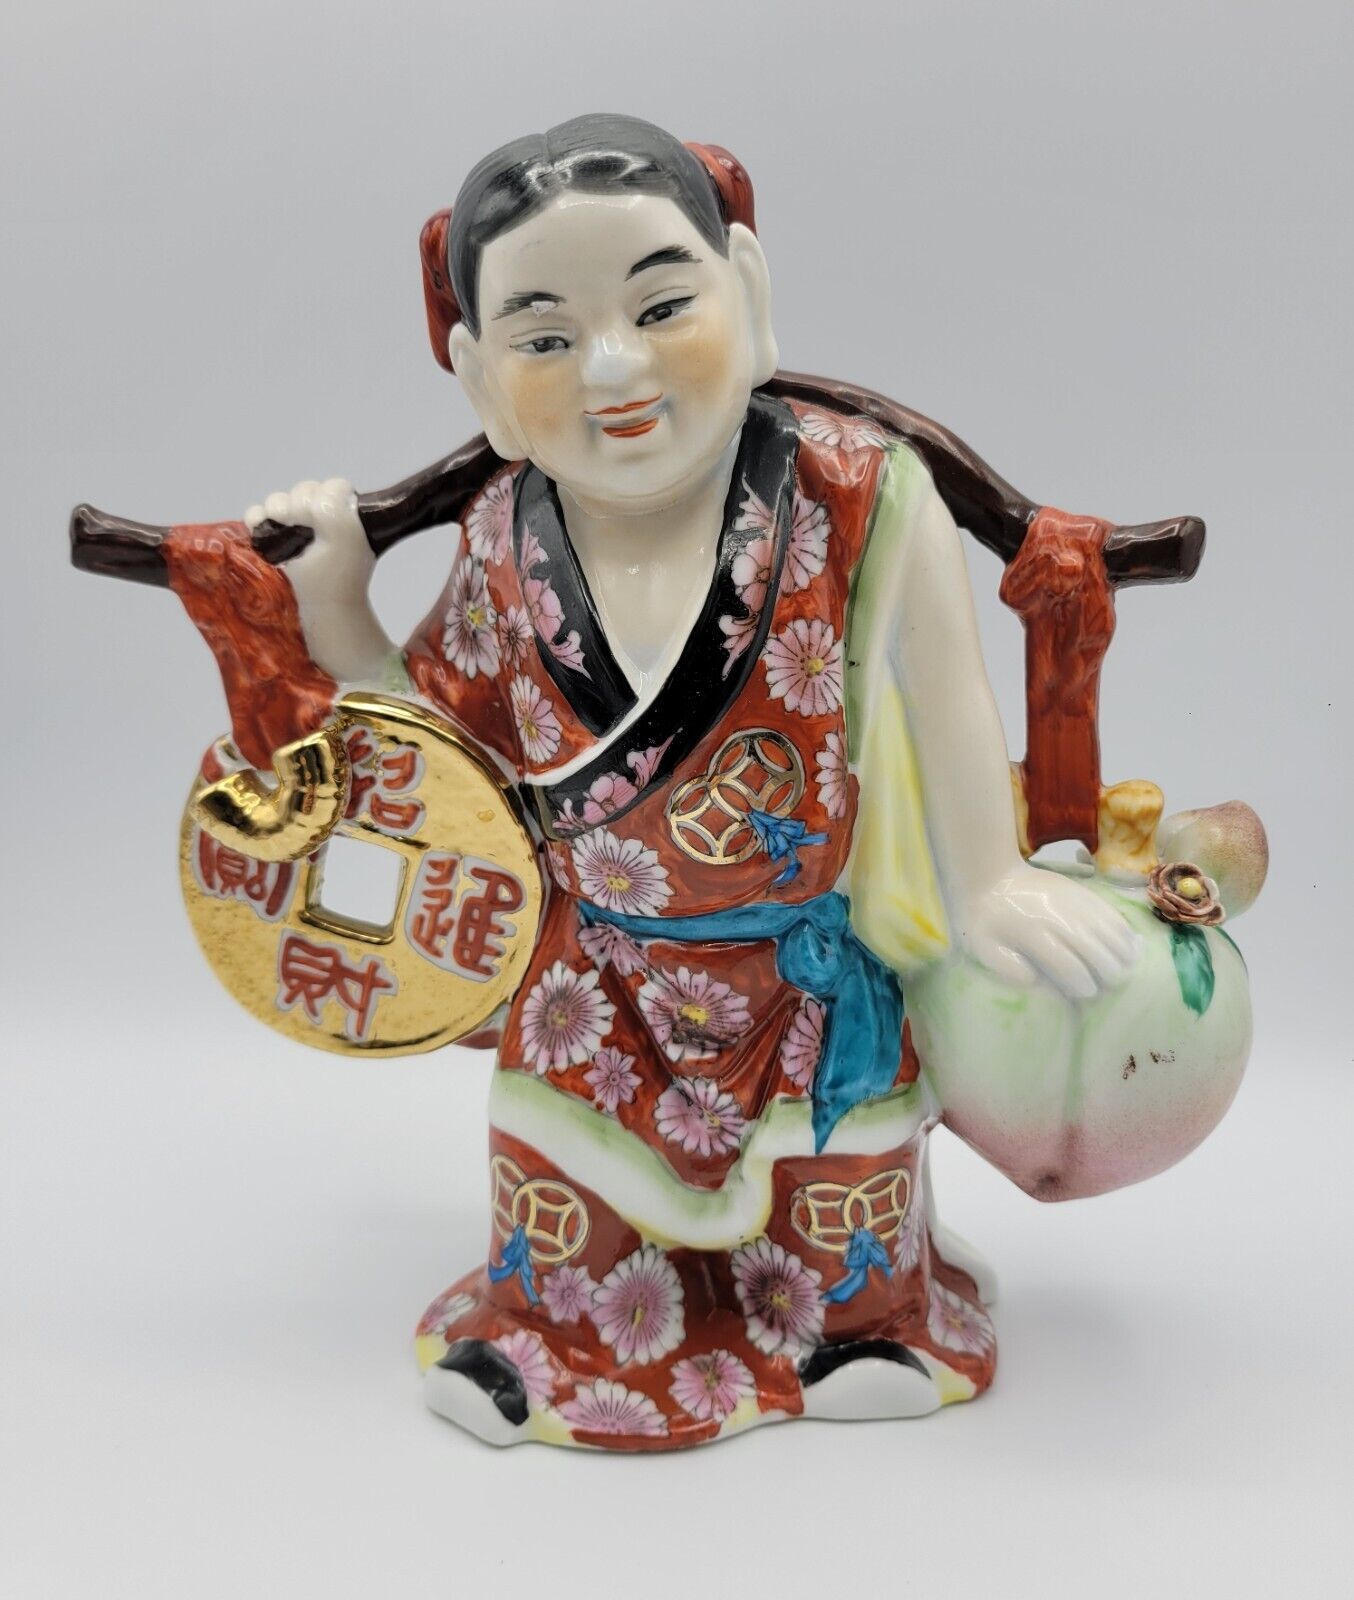 Vintage Chinese Girl Carrying Fruit & Coin on Carrying Pole Porcelain Figurine